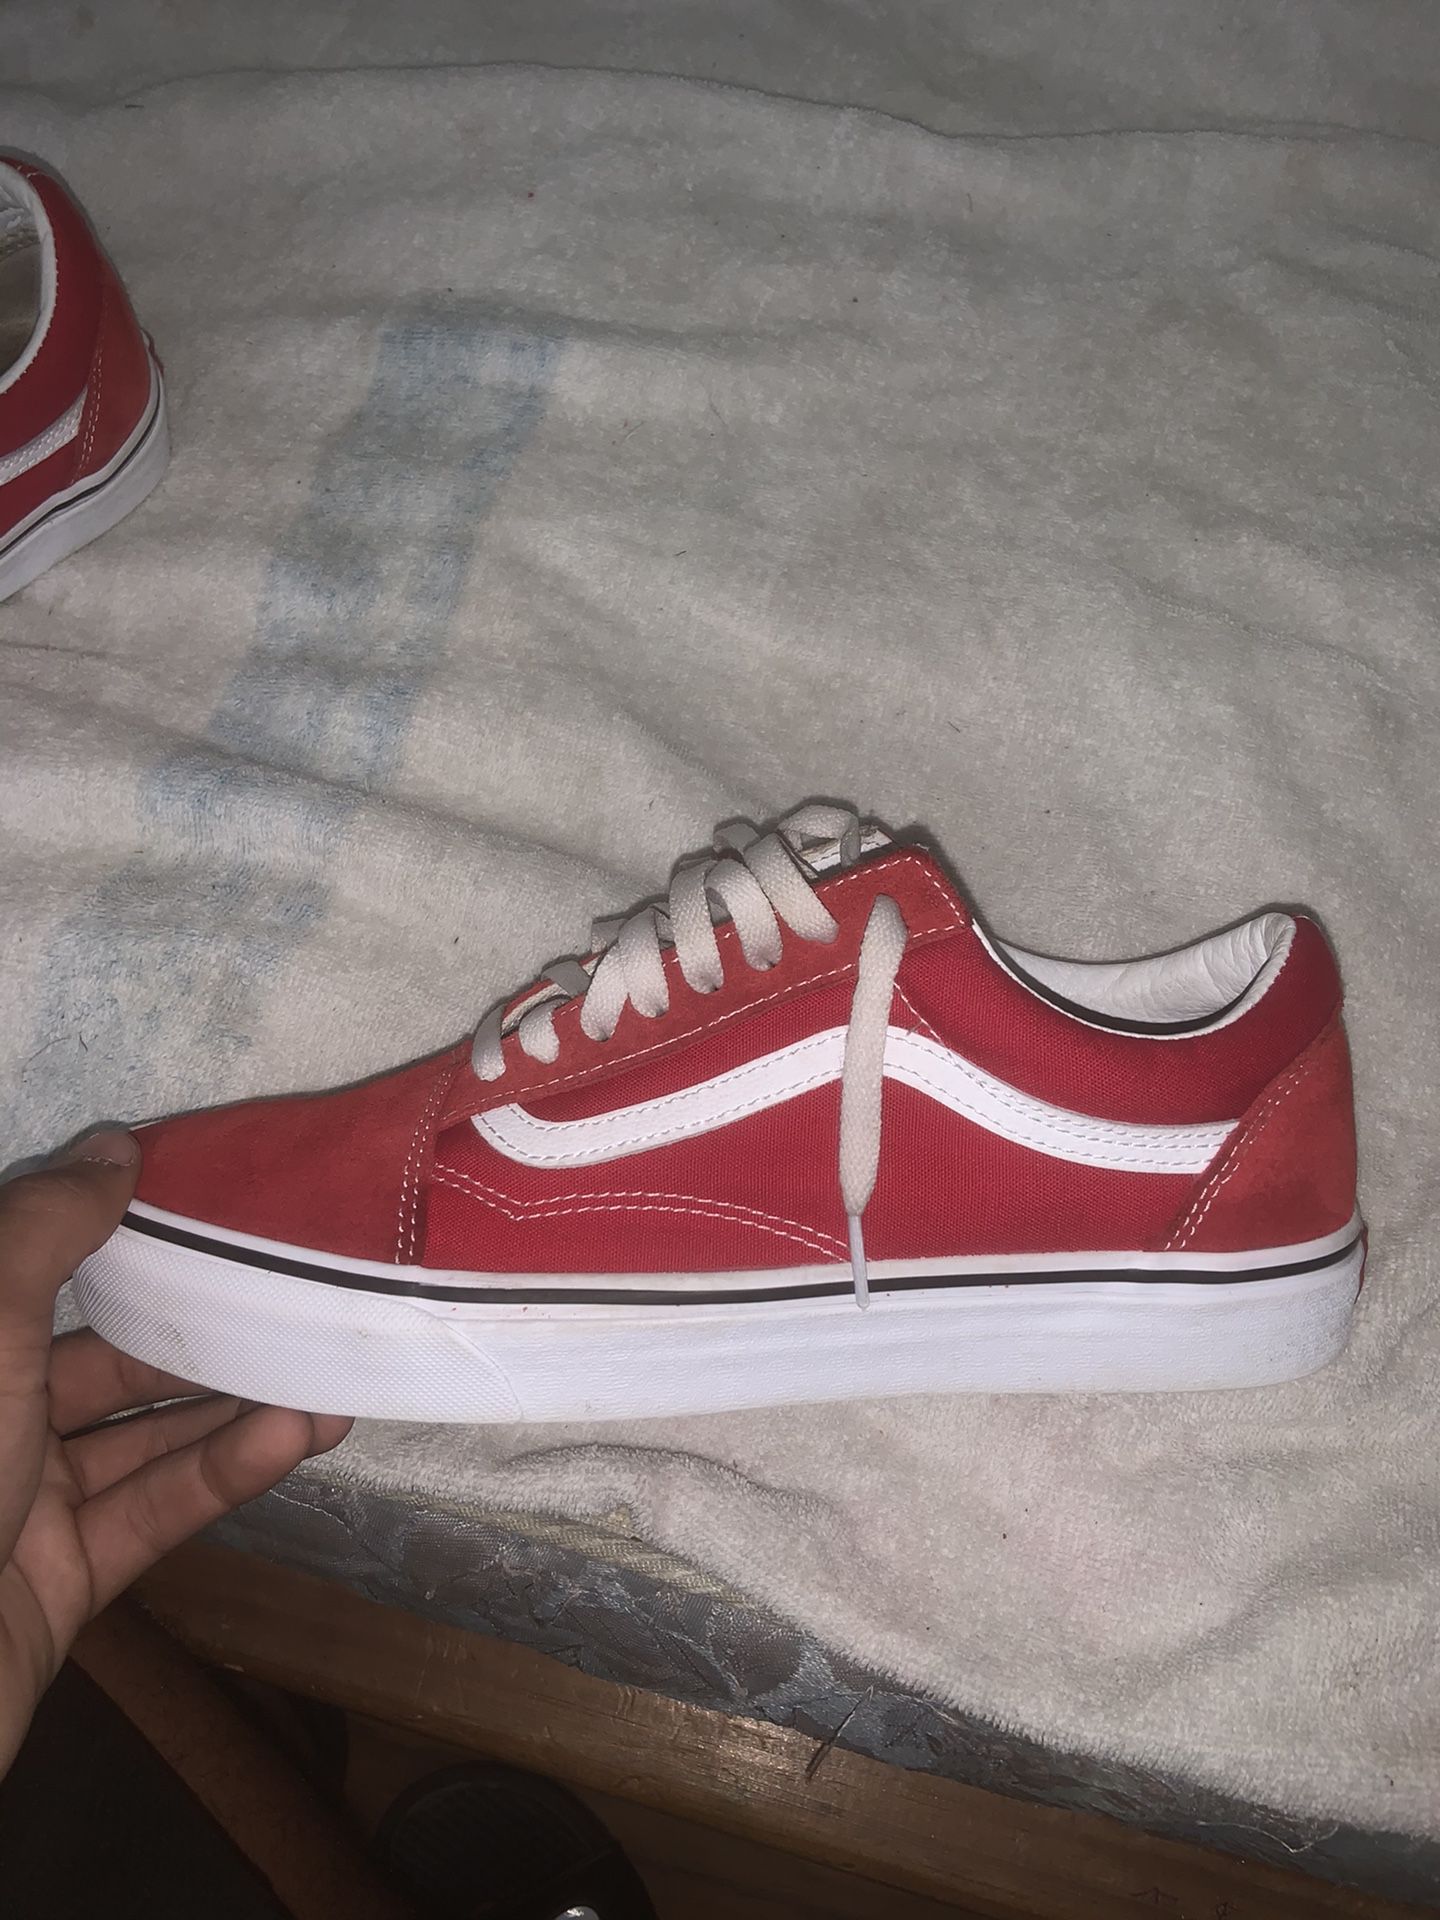 all red vans size 9.5